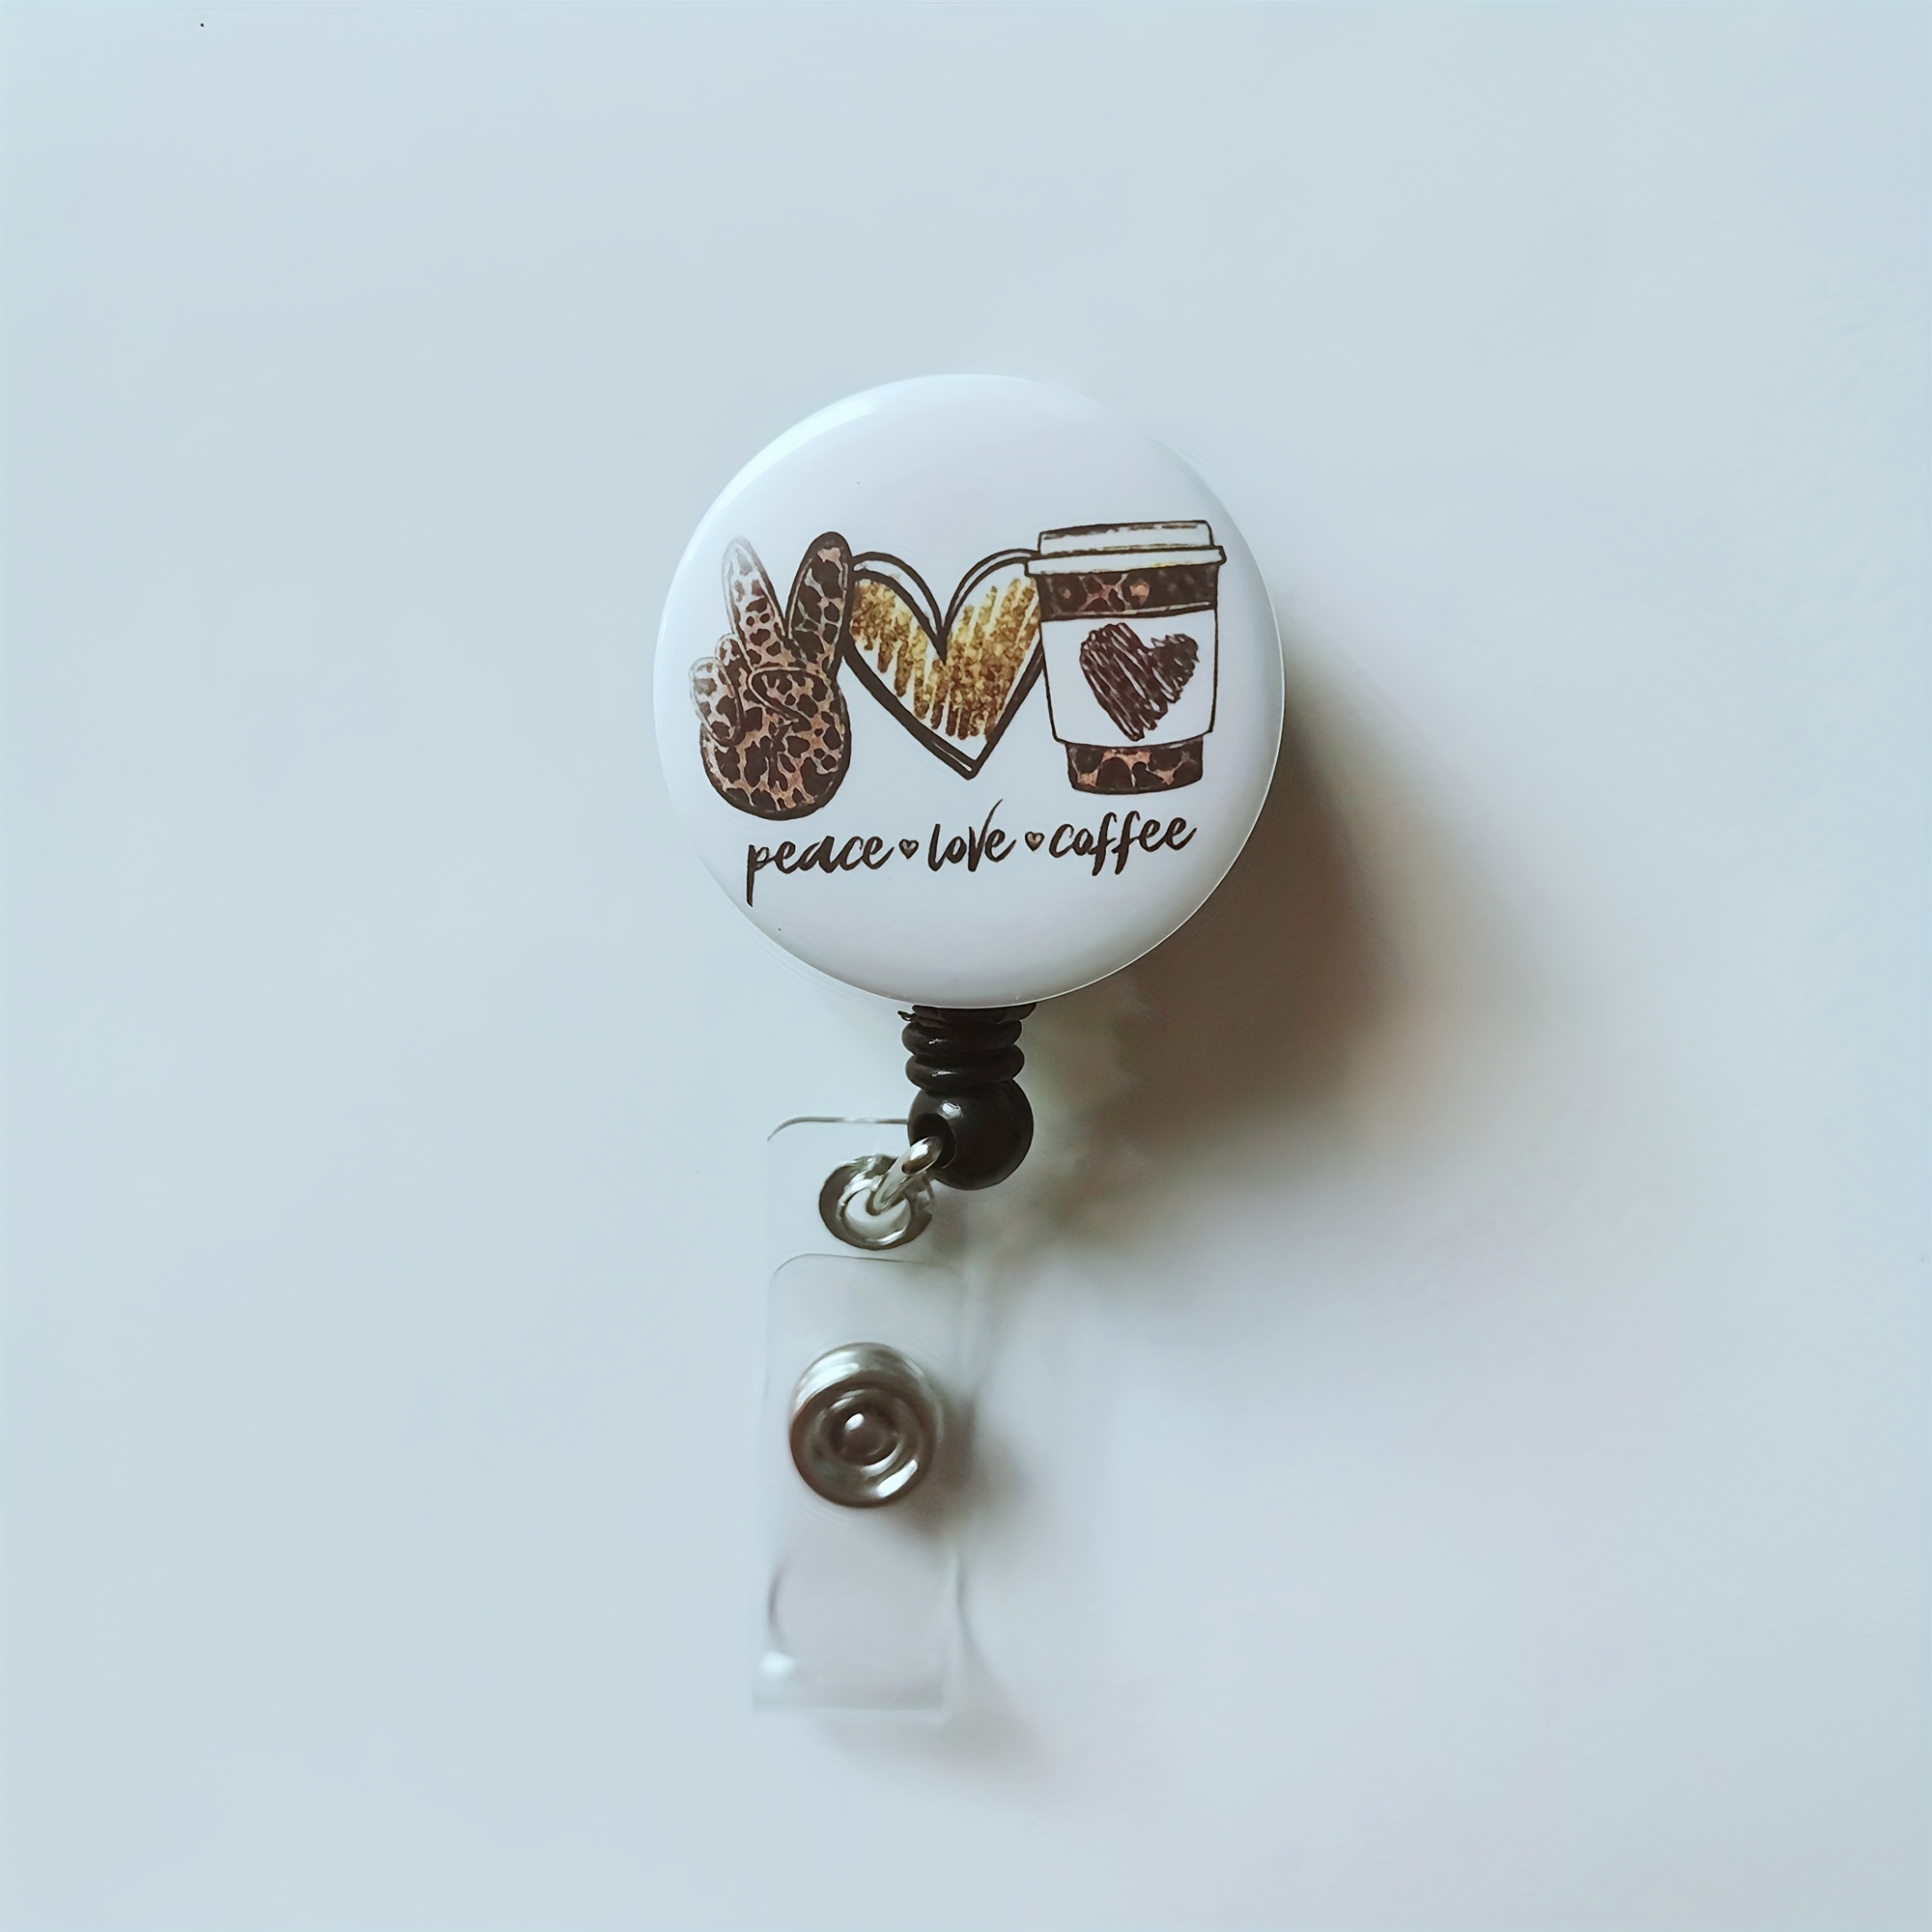 YAZMEEN Need More Coffee Retractable Badge Reel with Alligator Clip Funny ID Badge Holder for Office Worker Funny Coffee Badge Funny Sloth Badge